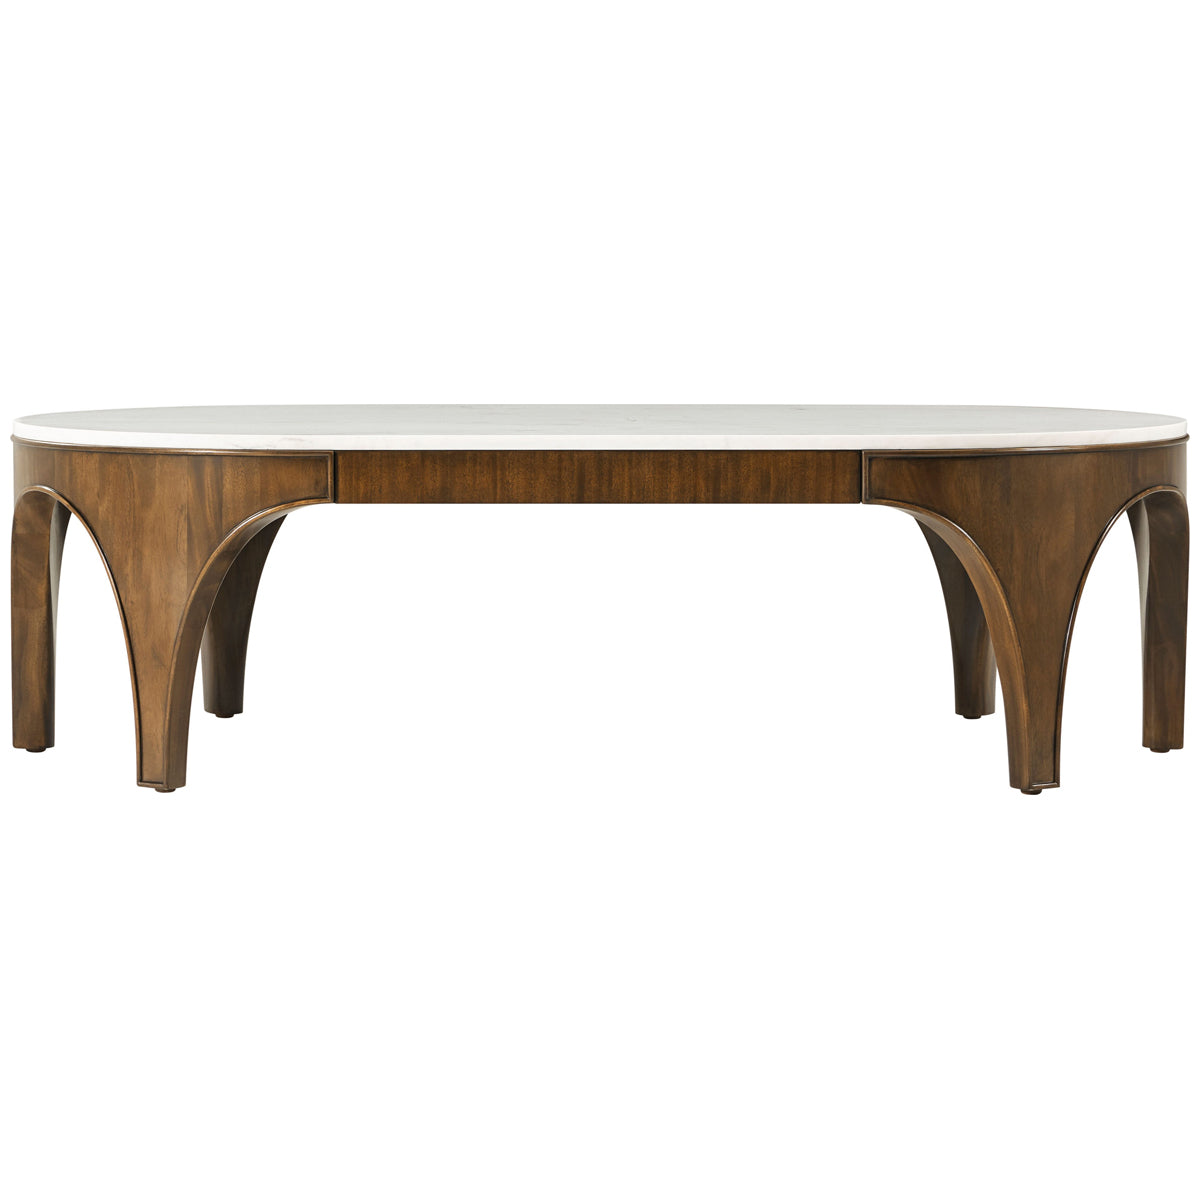 Theodore Alexander Arlo Cocktail Table